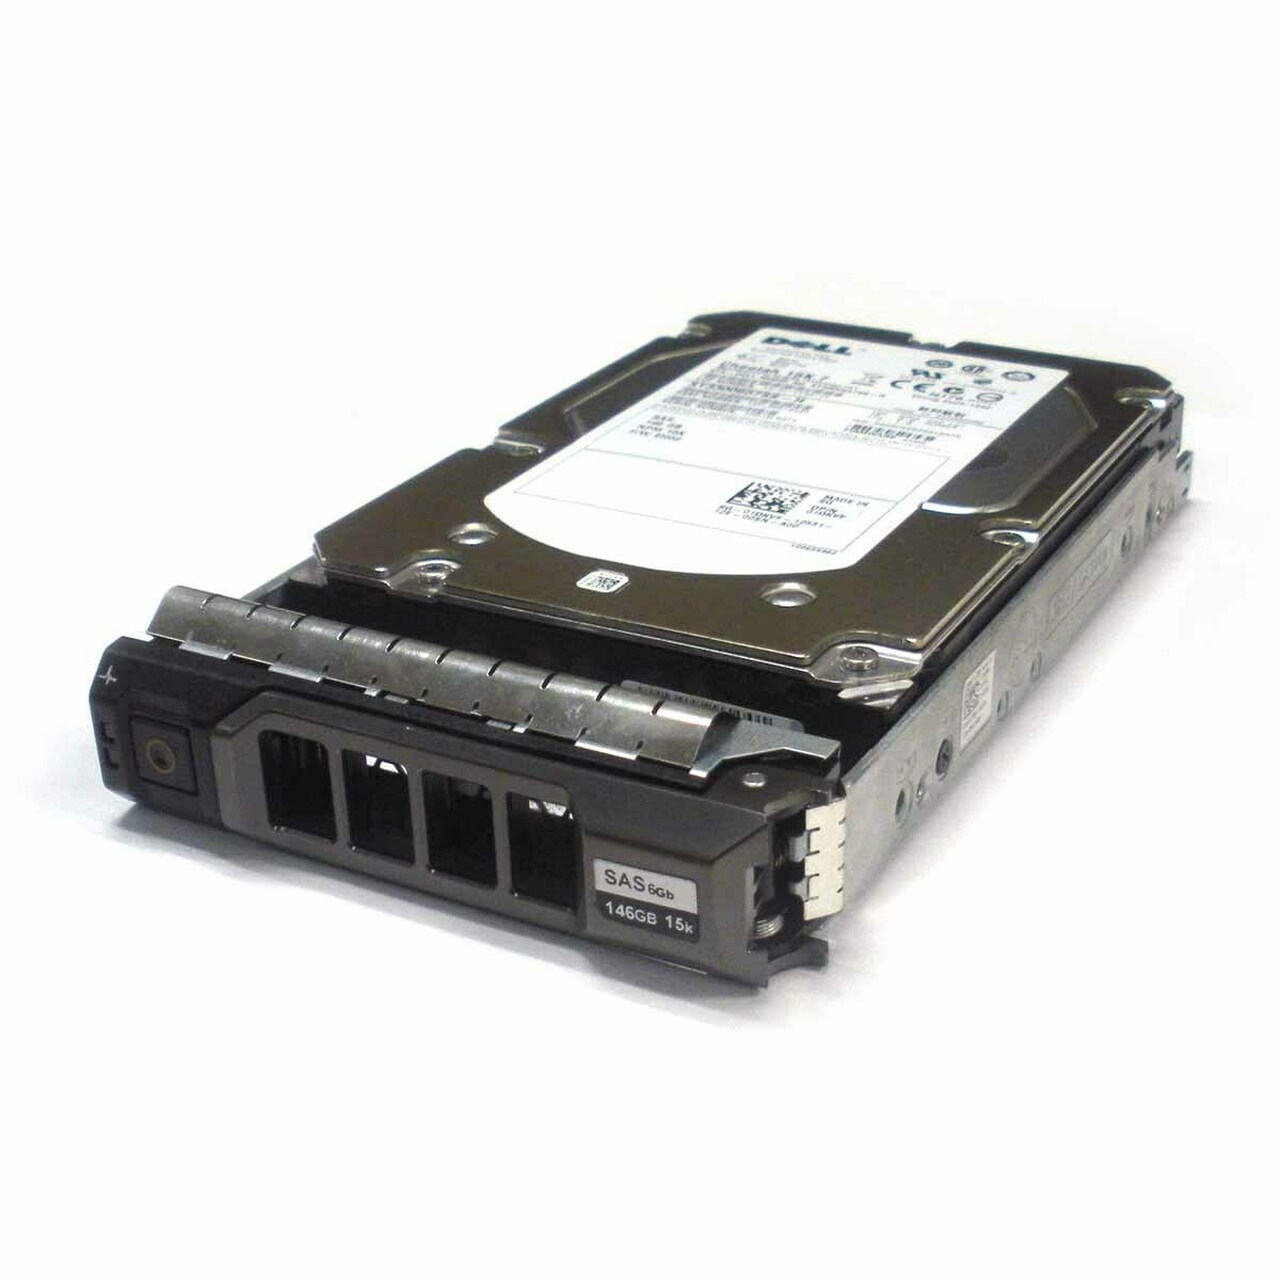 Save on Dell PowerEdge 860 Hard Drives from your trusted partners at Flagship Technologies.